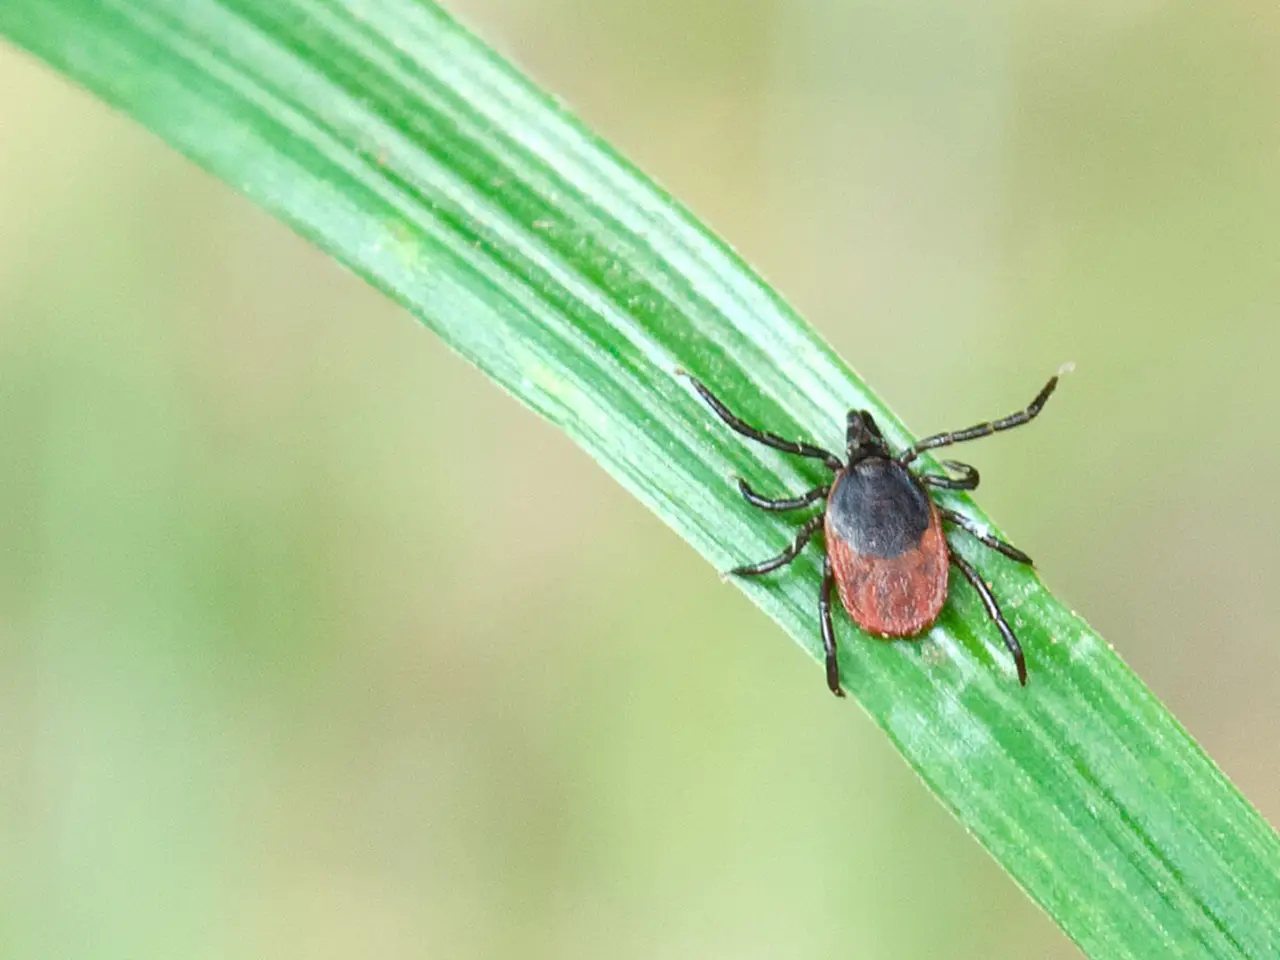 A close up of a tick resting on a blade of grass